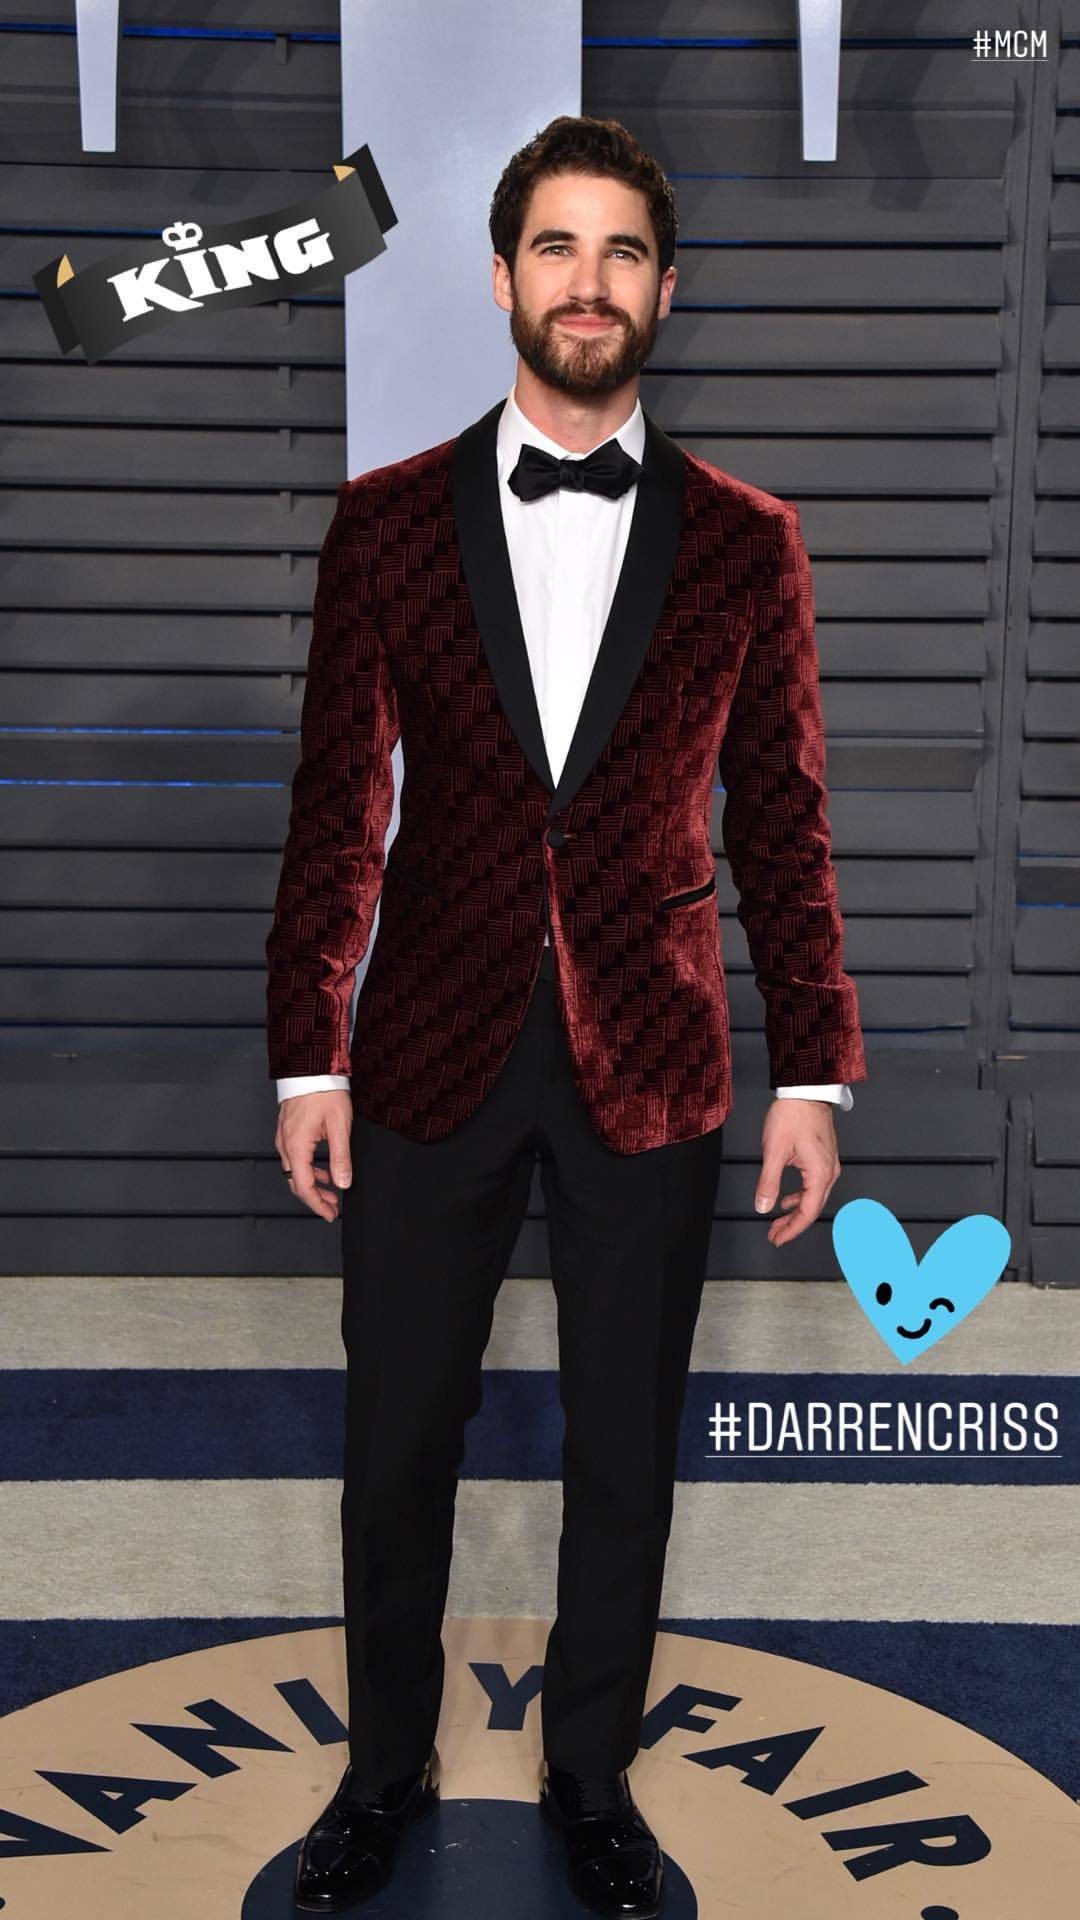 Globes75 - Darren's Miscellaneous Projects and Events for 2018 - Page 3 Tumblr_p67xapBh3g1wpi2k2o1_1280